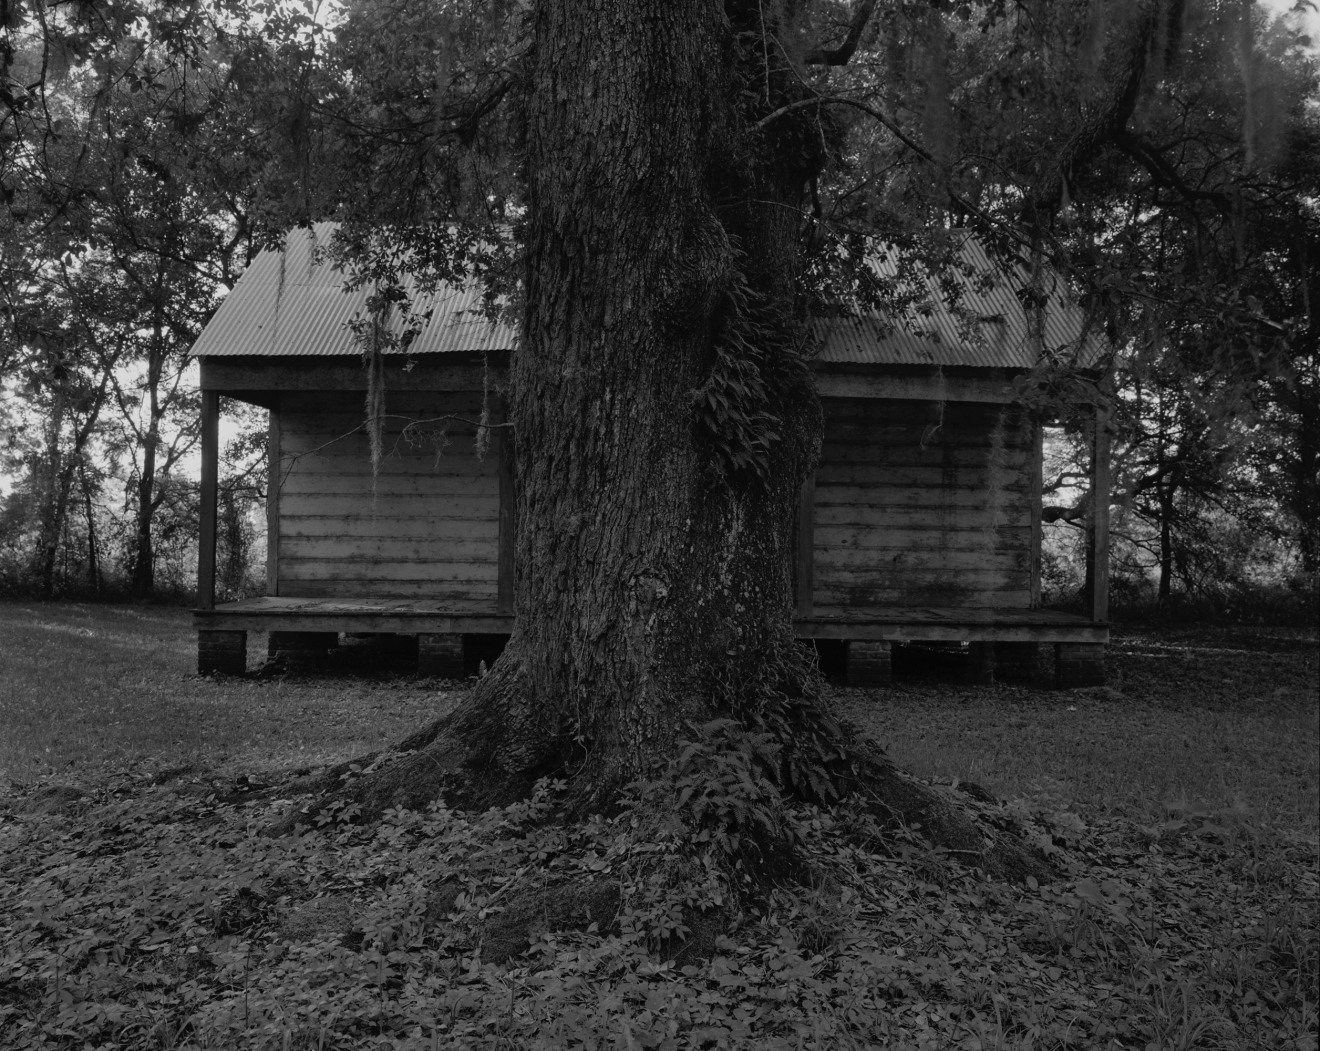 Tree and Cabin, 2019, gelatin silver print